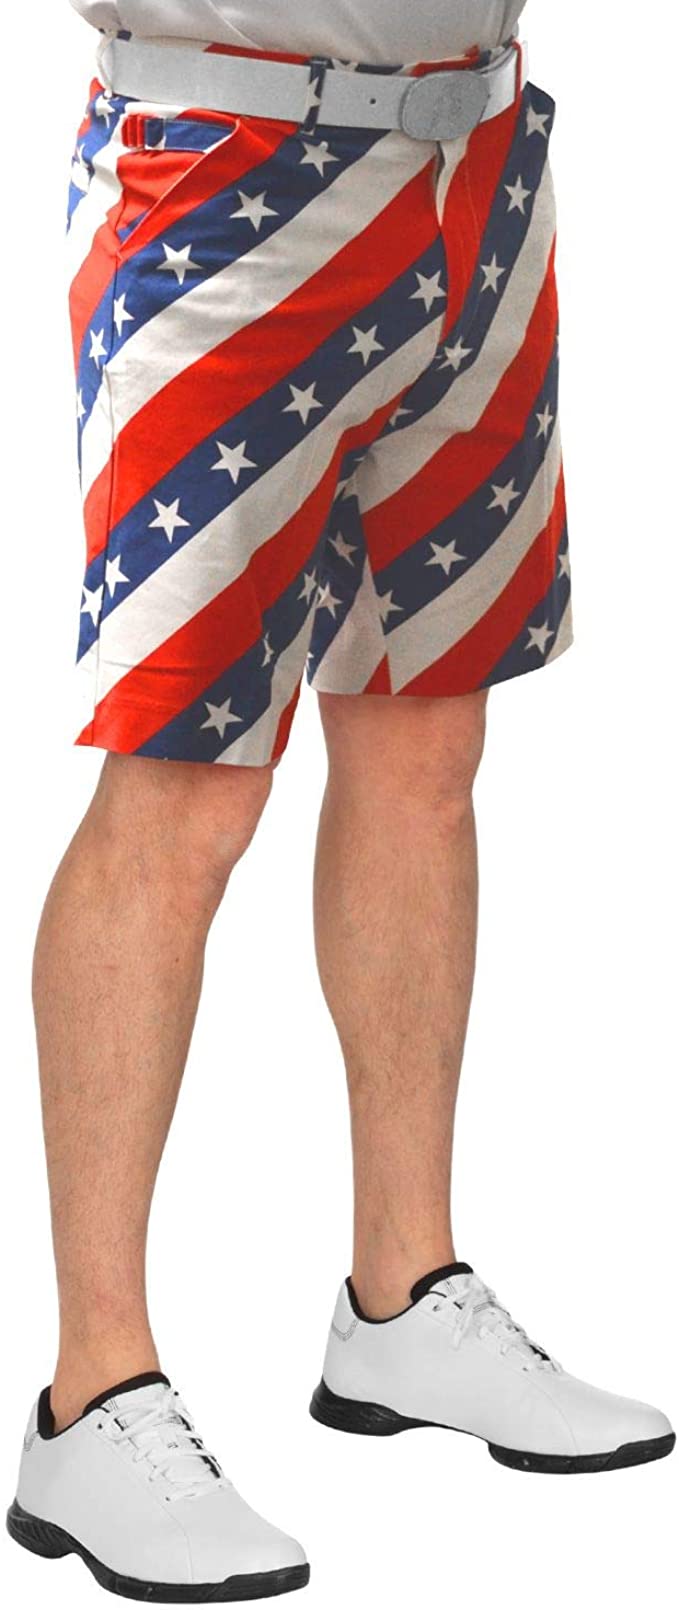 Mens Royal and Awesome Patterned Golf Shorts